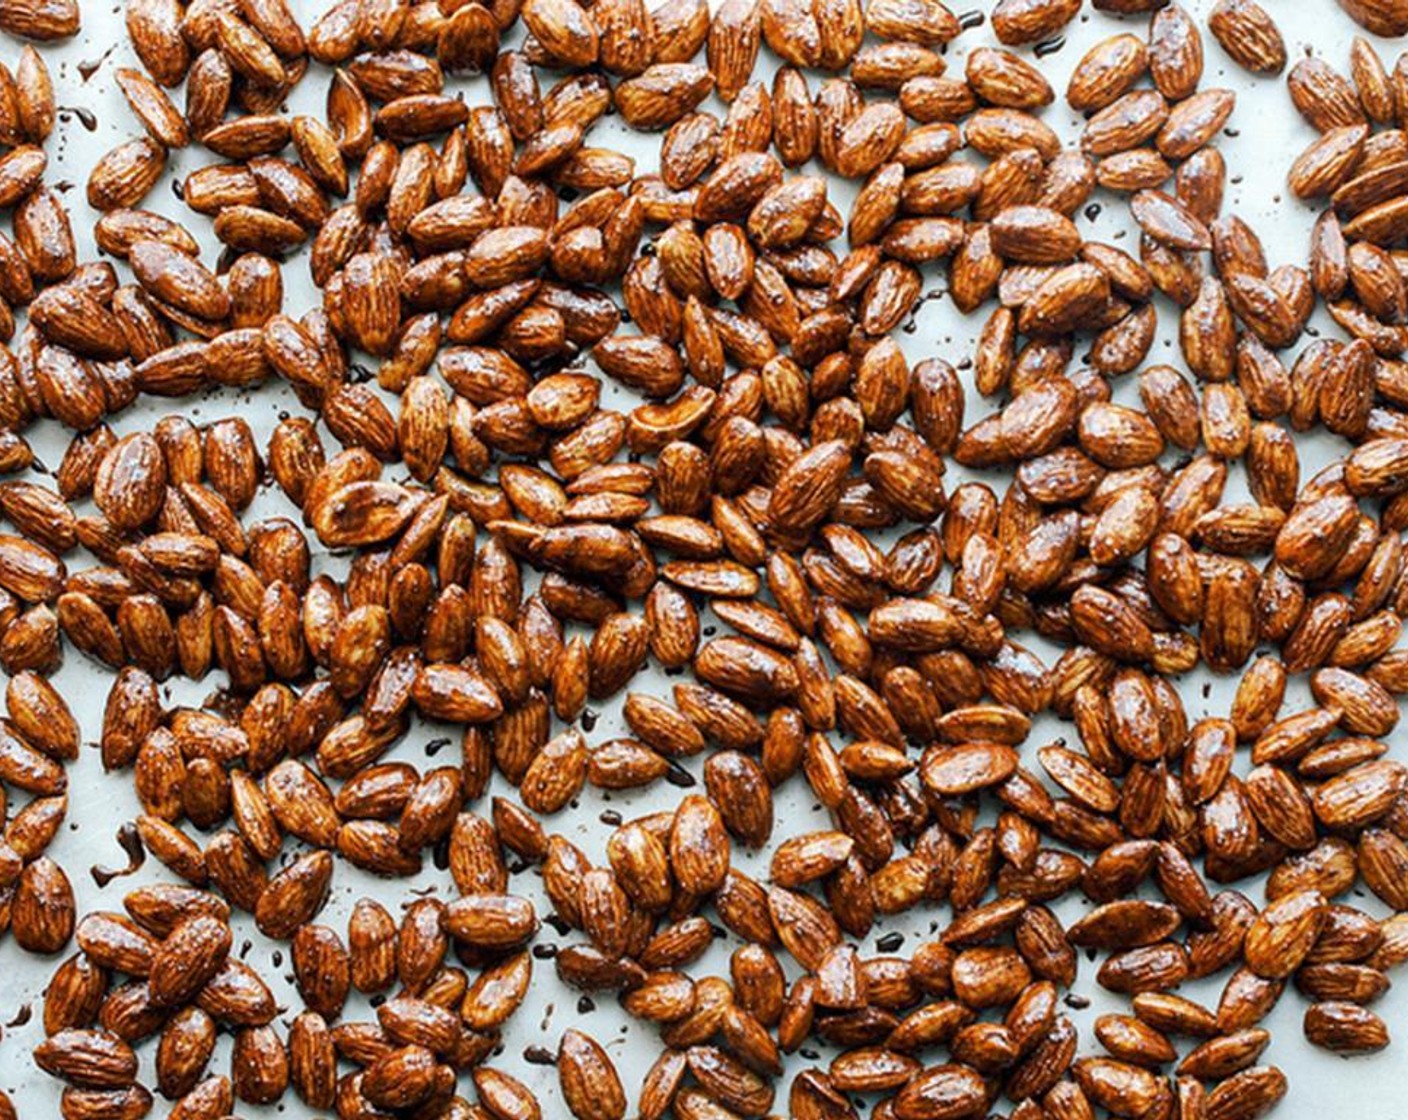 step 3 On a large baking sheet lined with parchment paper or lightly oiled, spread almonds in a single layer. It’s ok if they’re touching each other.